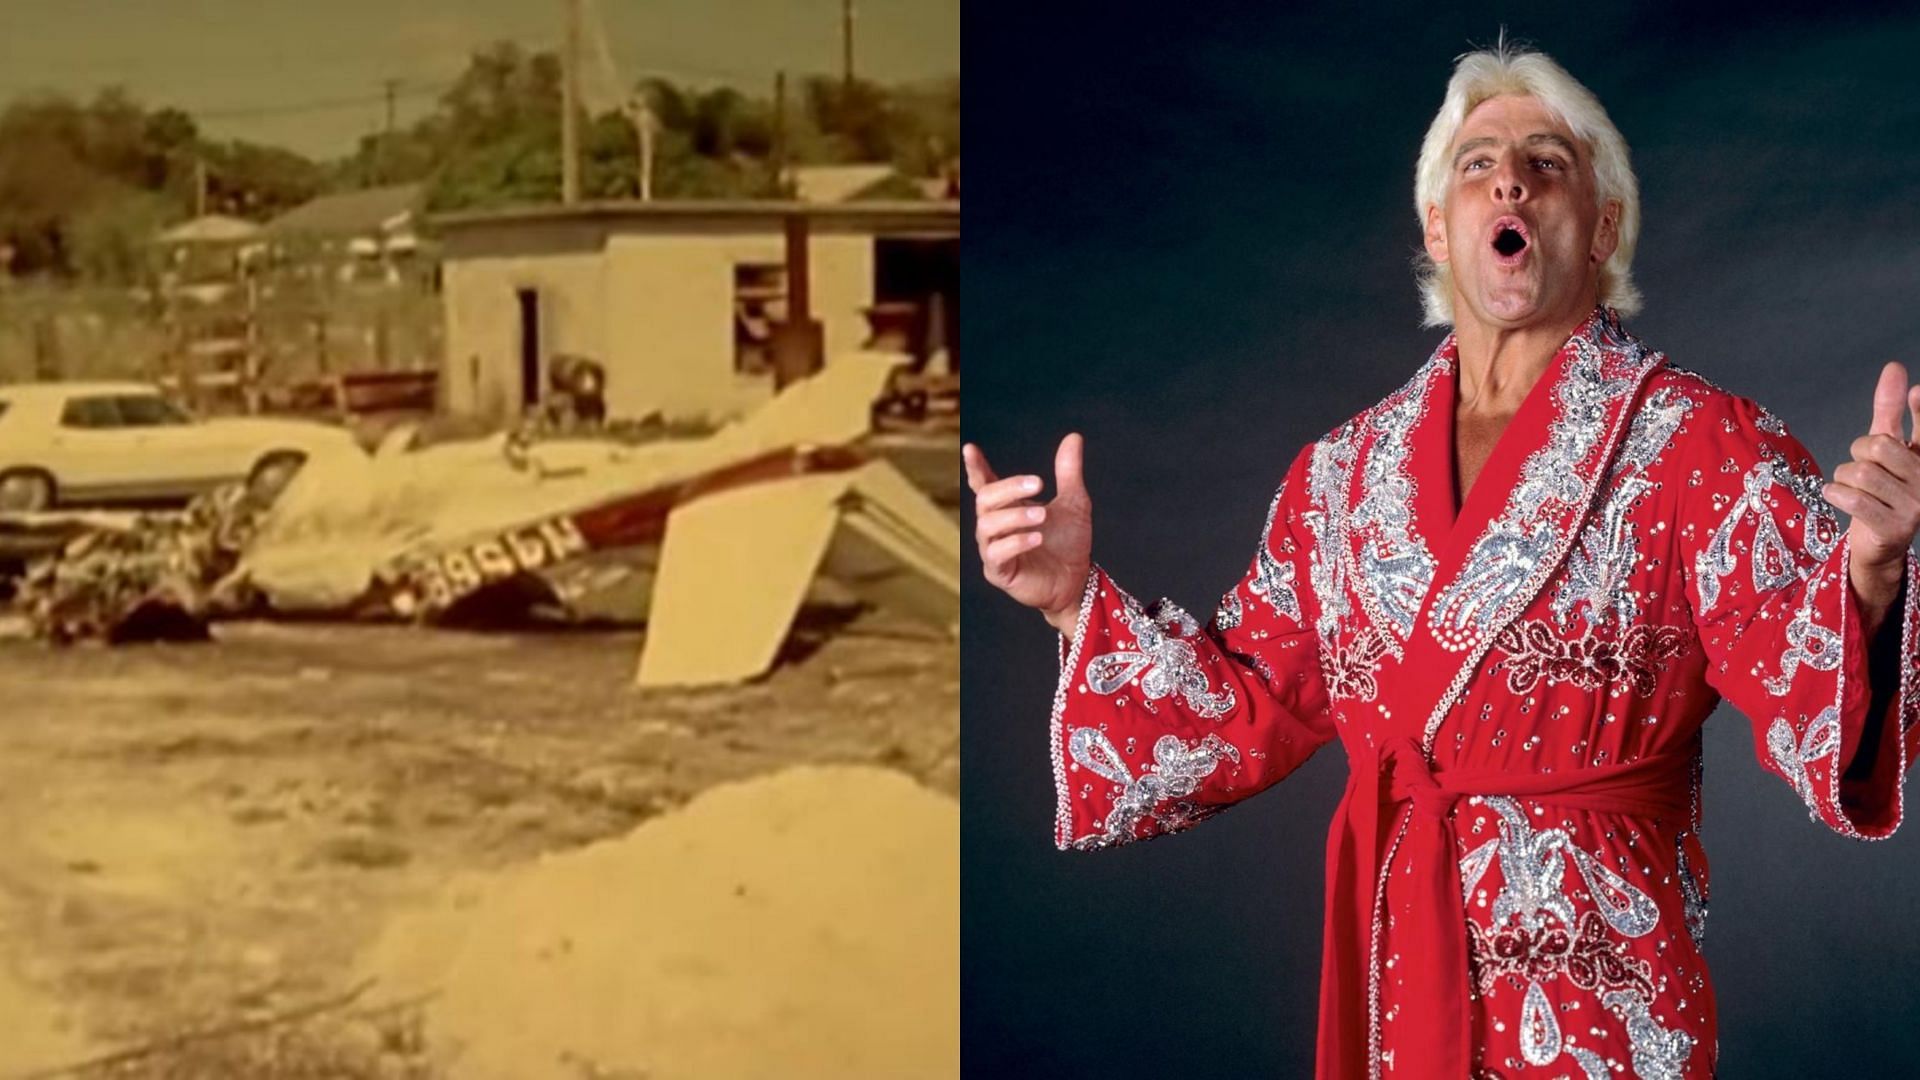 WWE Hall of Famer Ric Flair almost lost his life in a plane crash in 1975